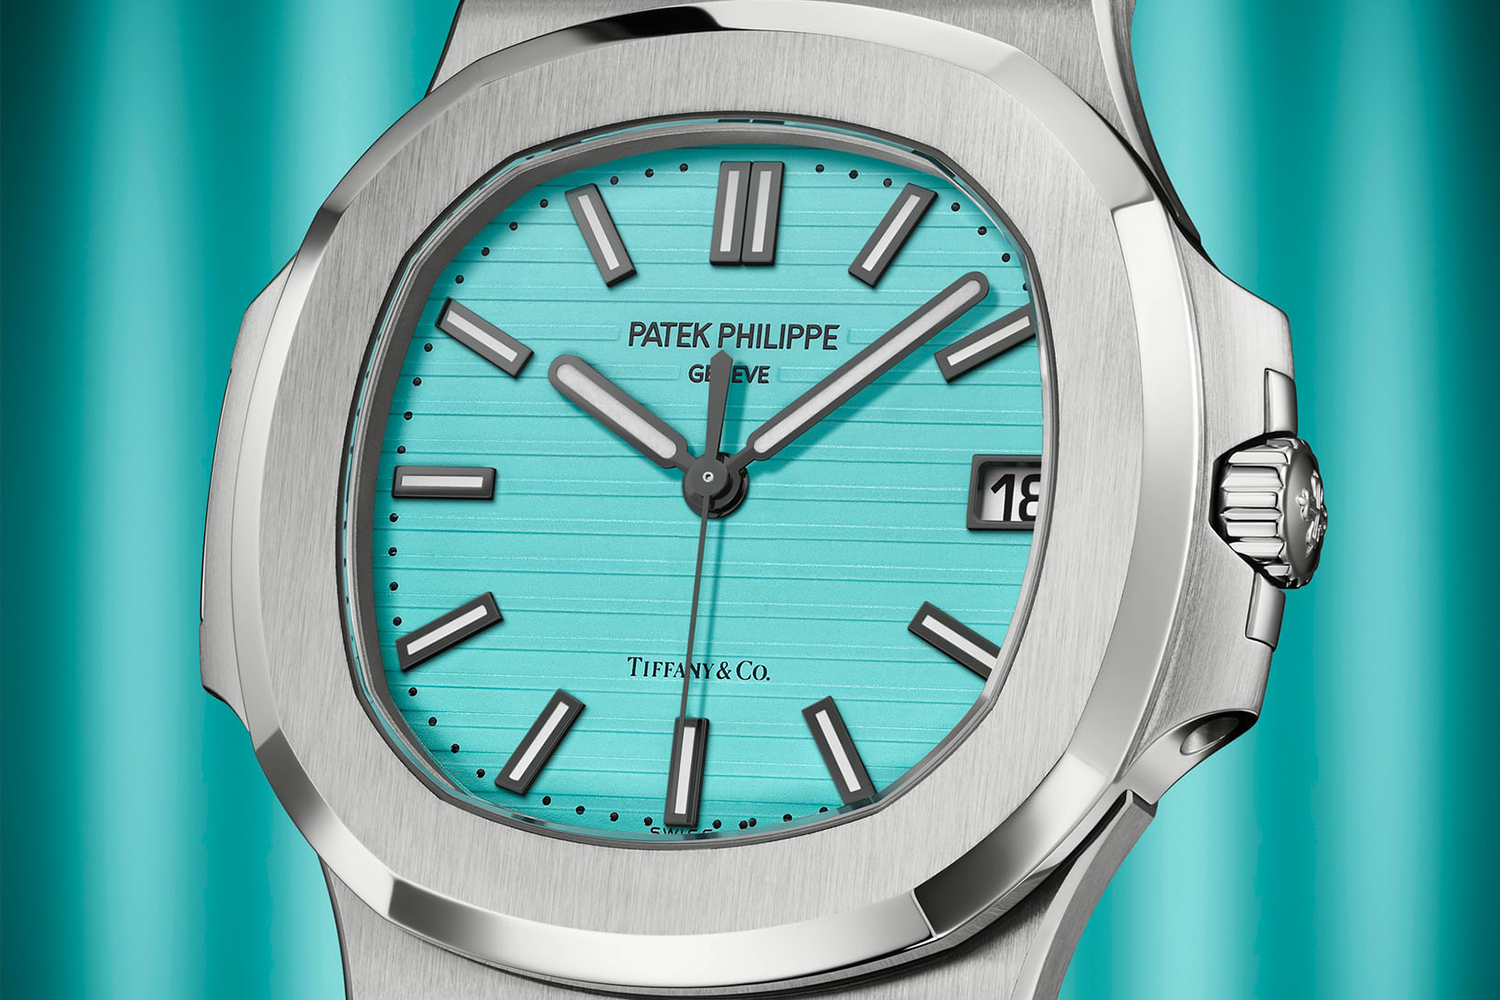 Let's Not Pretend There Are Watches Like the Tiffany Patek - InsideHook